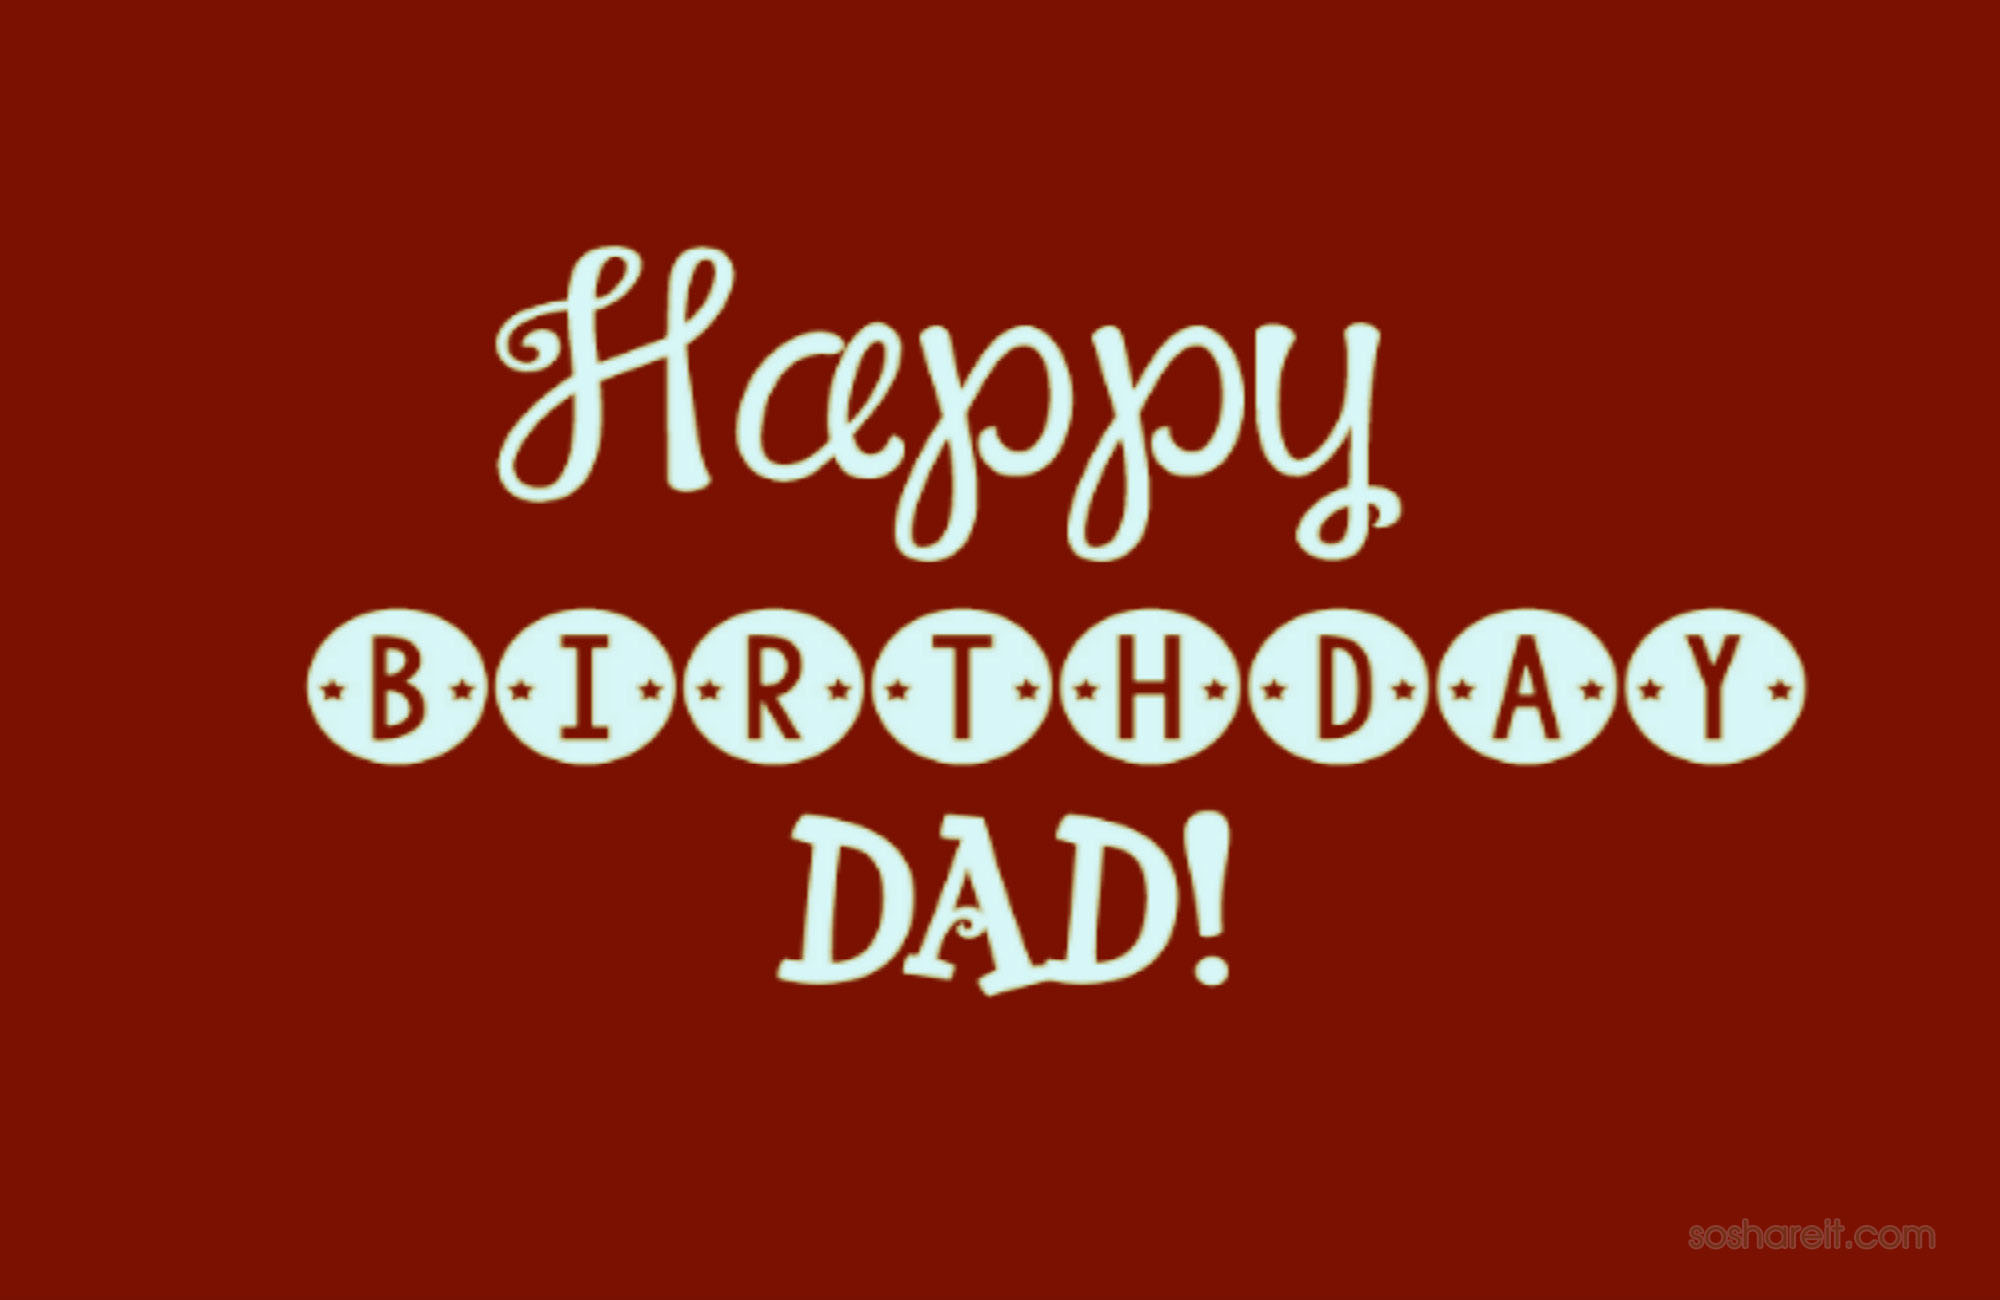 Happy Birthday Dad wishes Quotes and Top HD Wallpapers